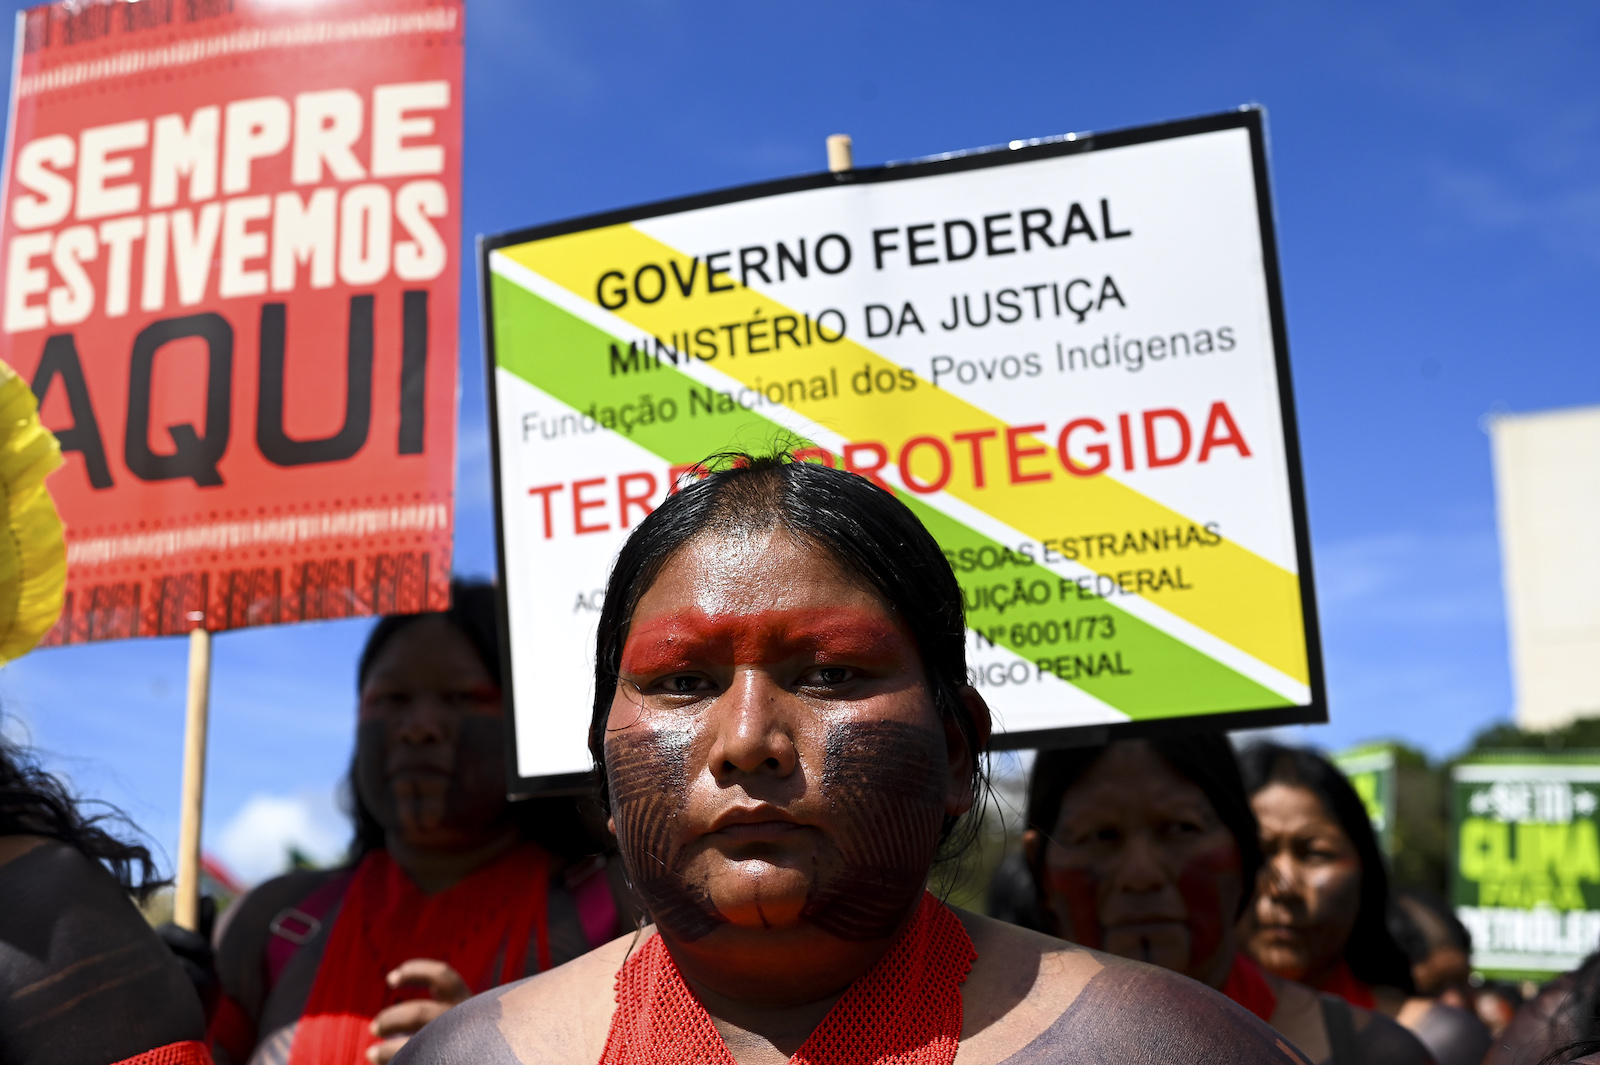 A woman with intricate tattoos and red face paint stares directly into the camera with protest signs behind her